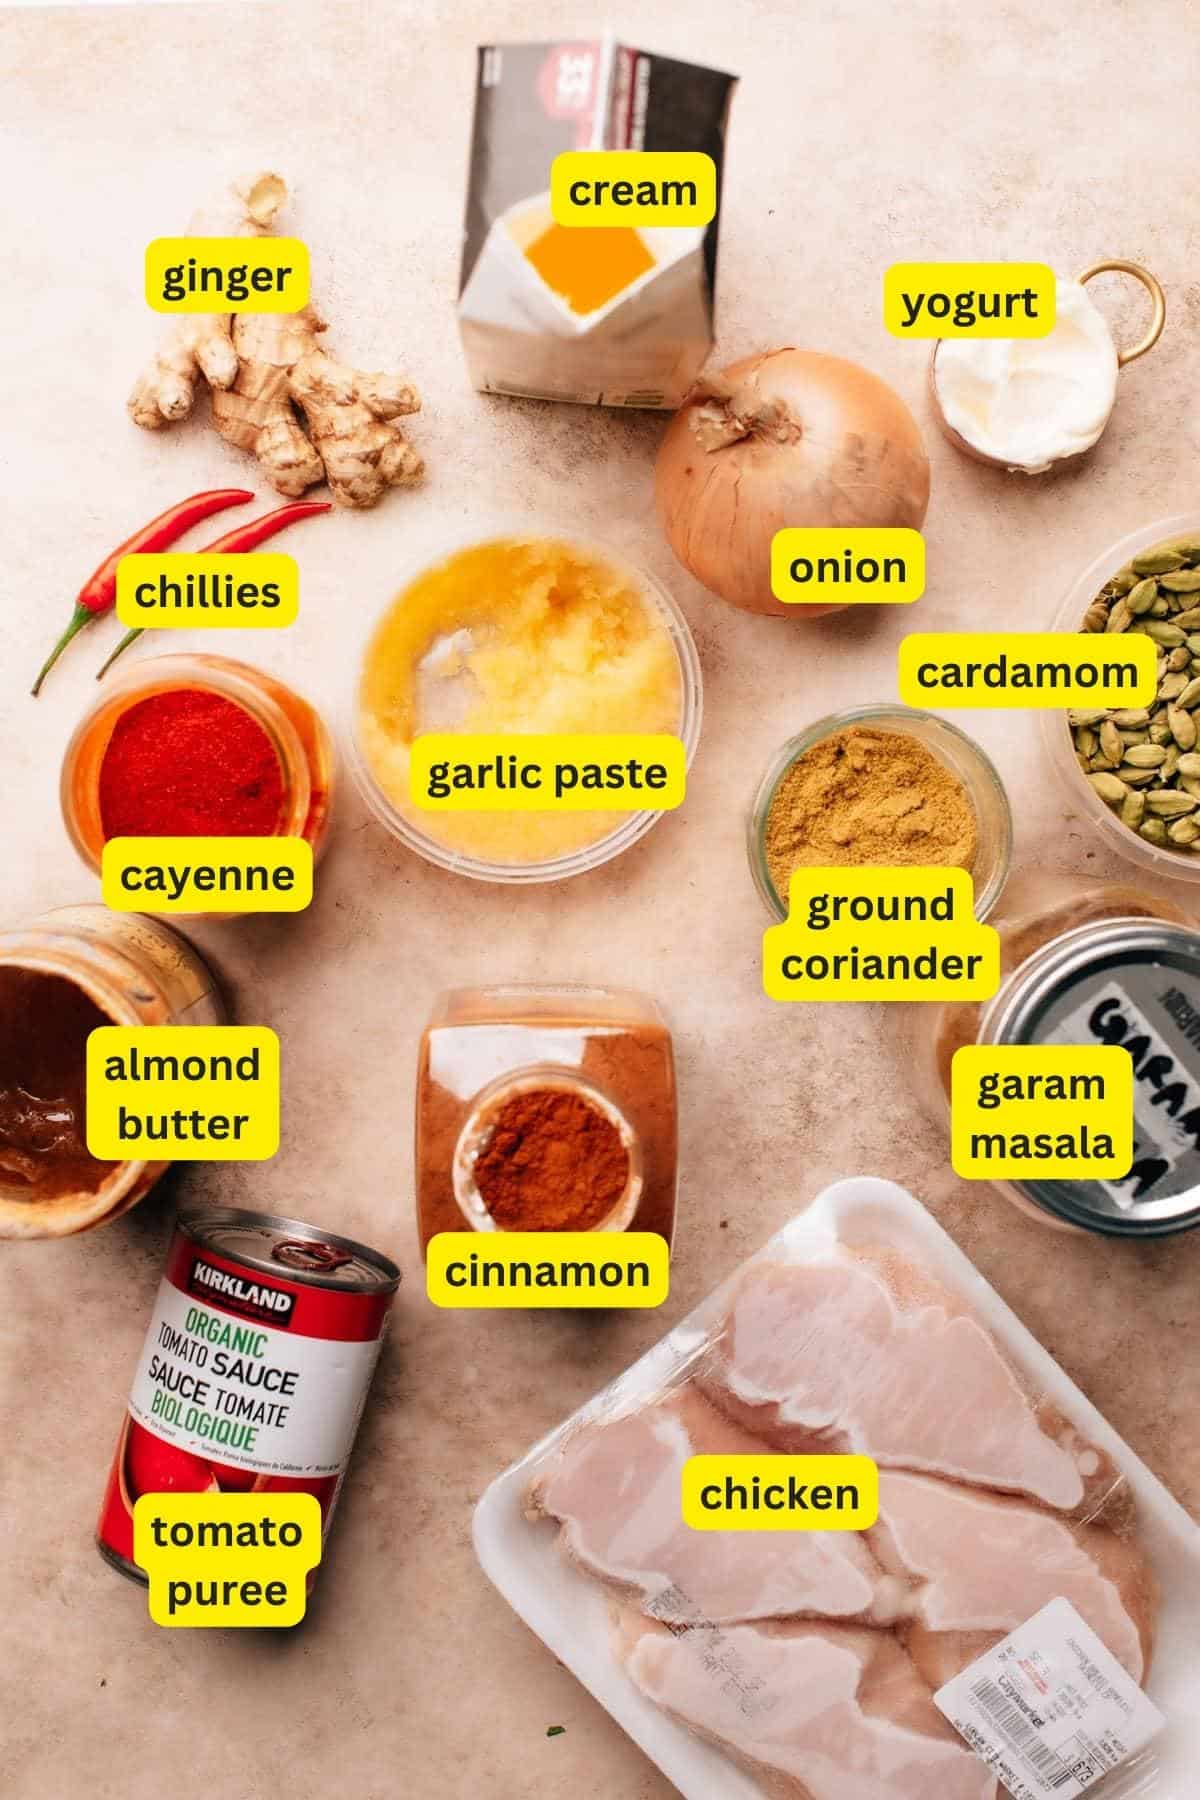 Ingredients for Chicken korma are laid out on a kitchen counter top